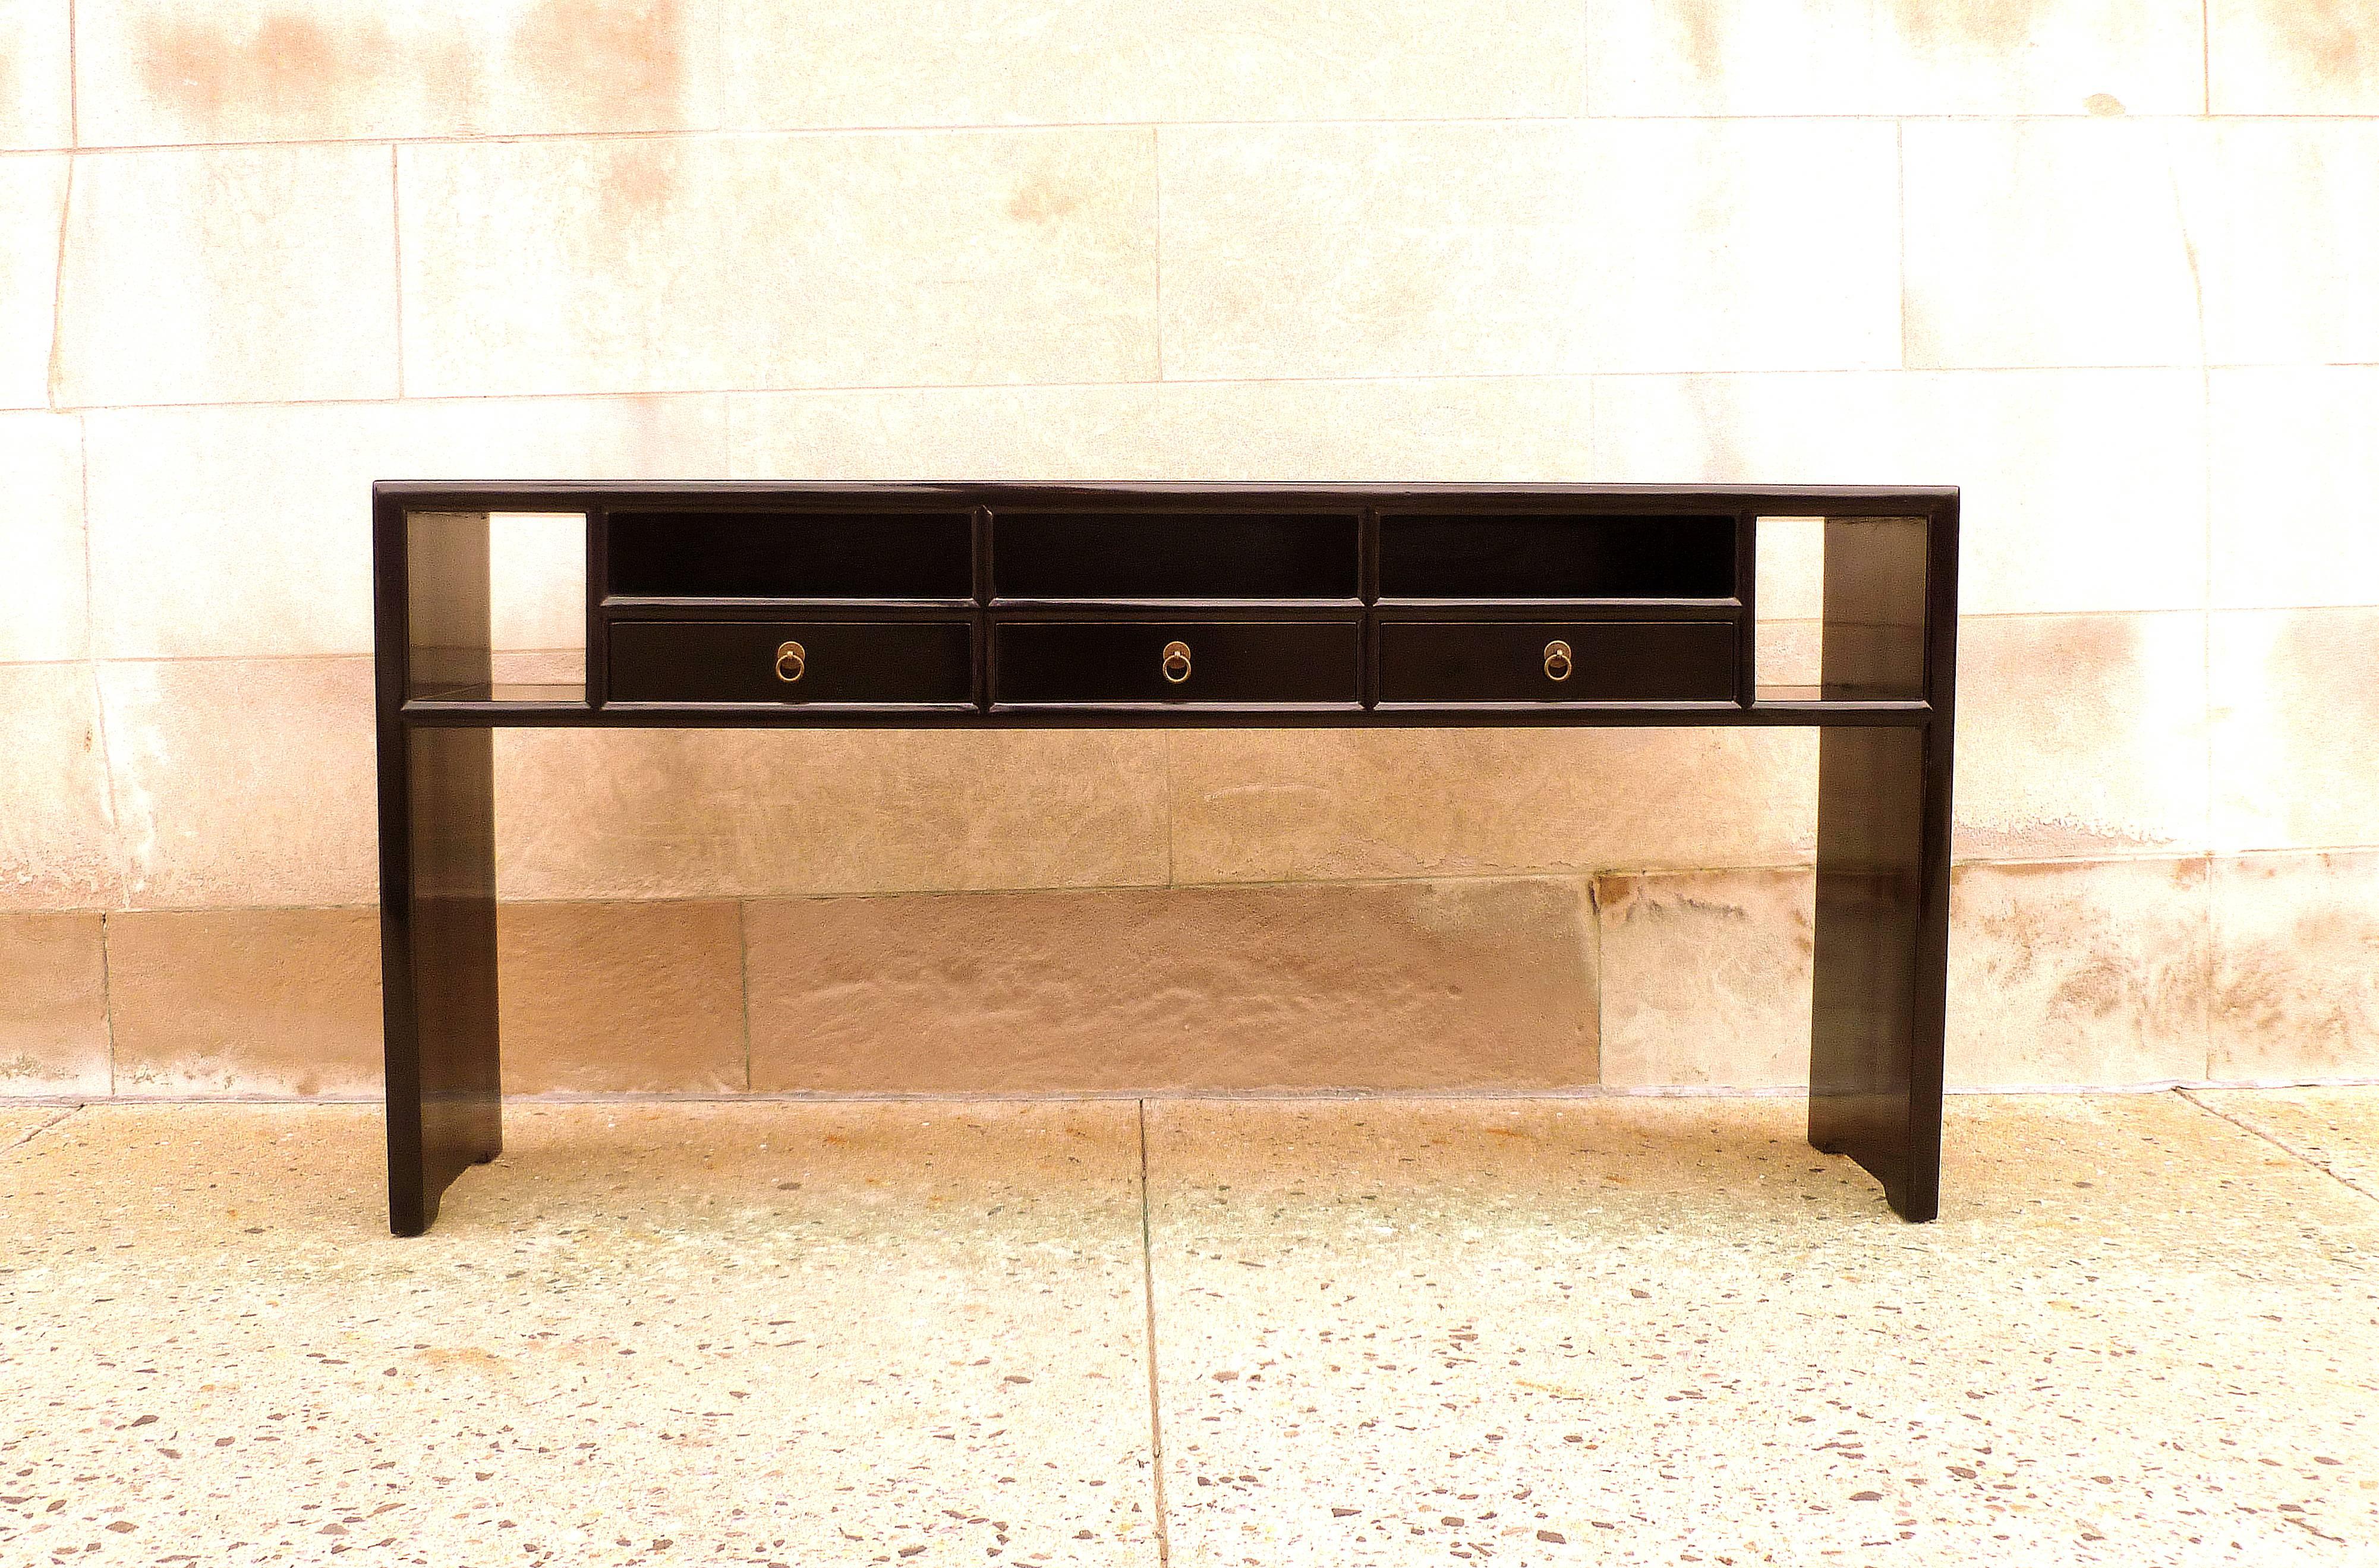 Fine black lacquer console table with waterfall legs, three drawers and open spaces. Very elegant and beautiful piece.